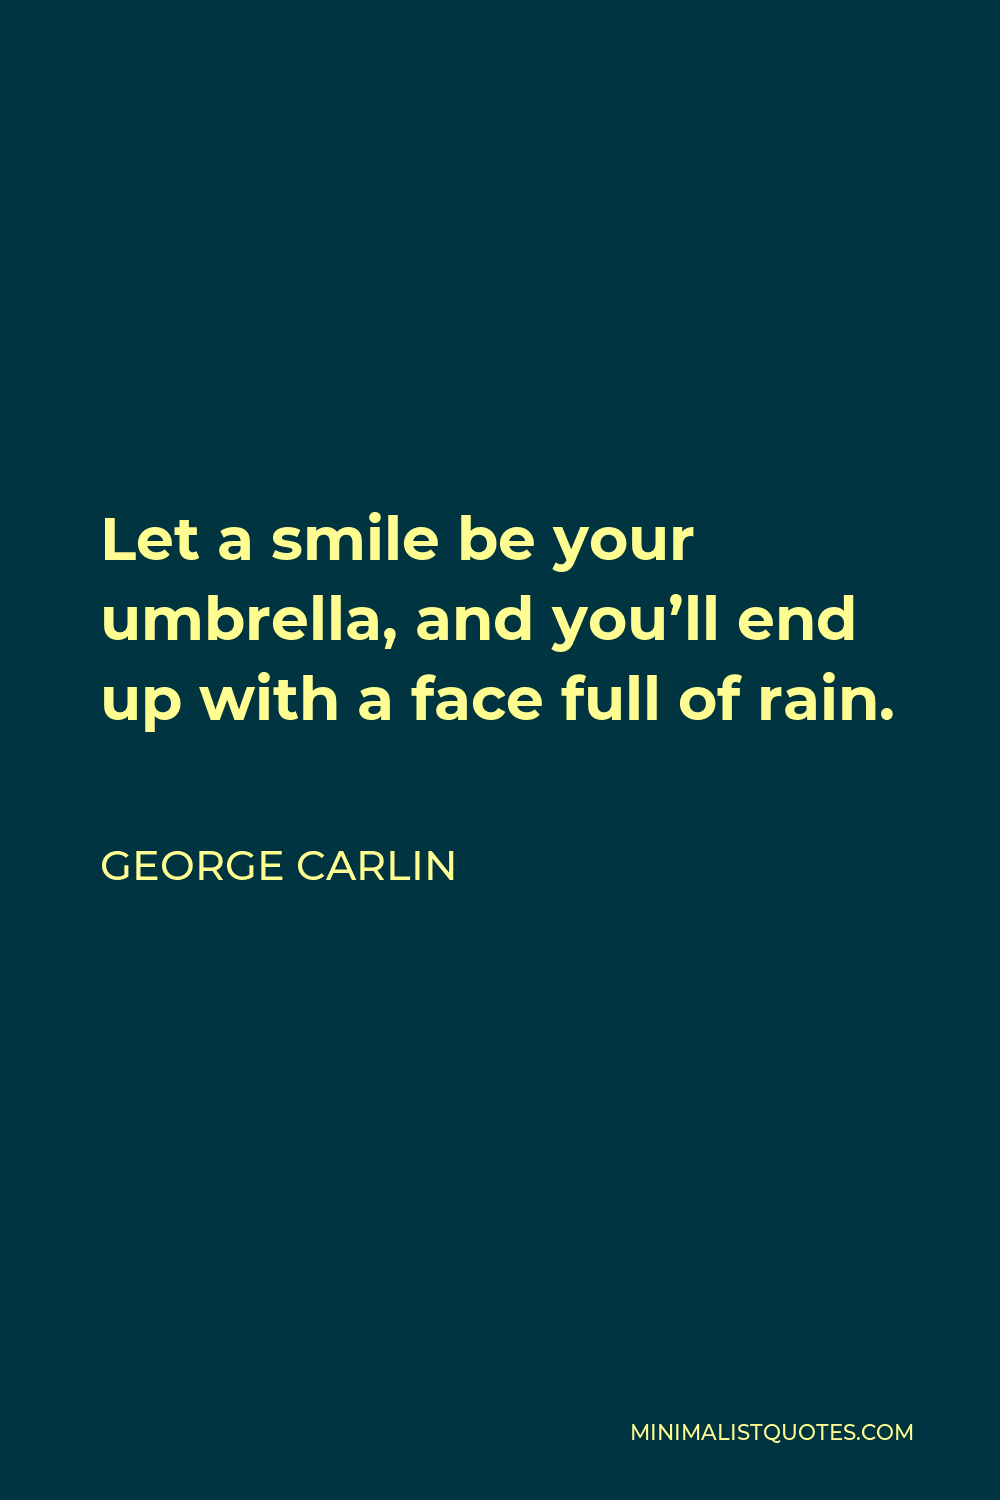 George Carlin Quote - Let a smile be your umbrella, and you’ll end up with a face full of rain.